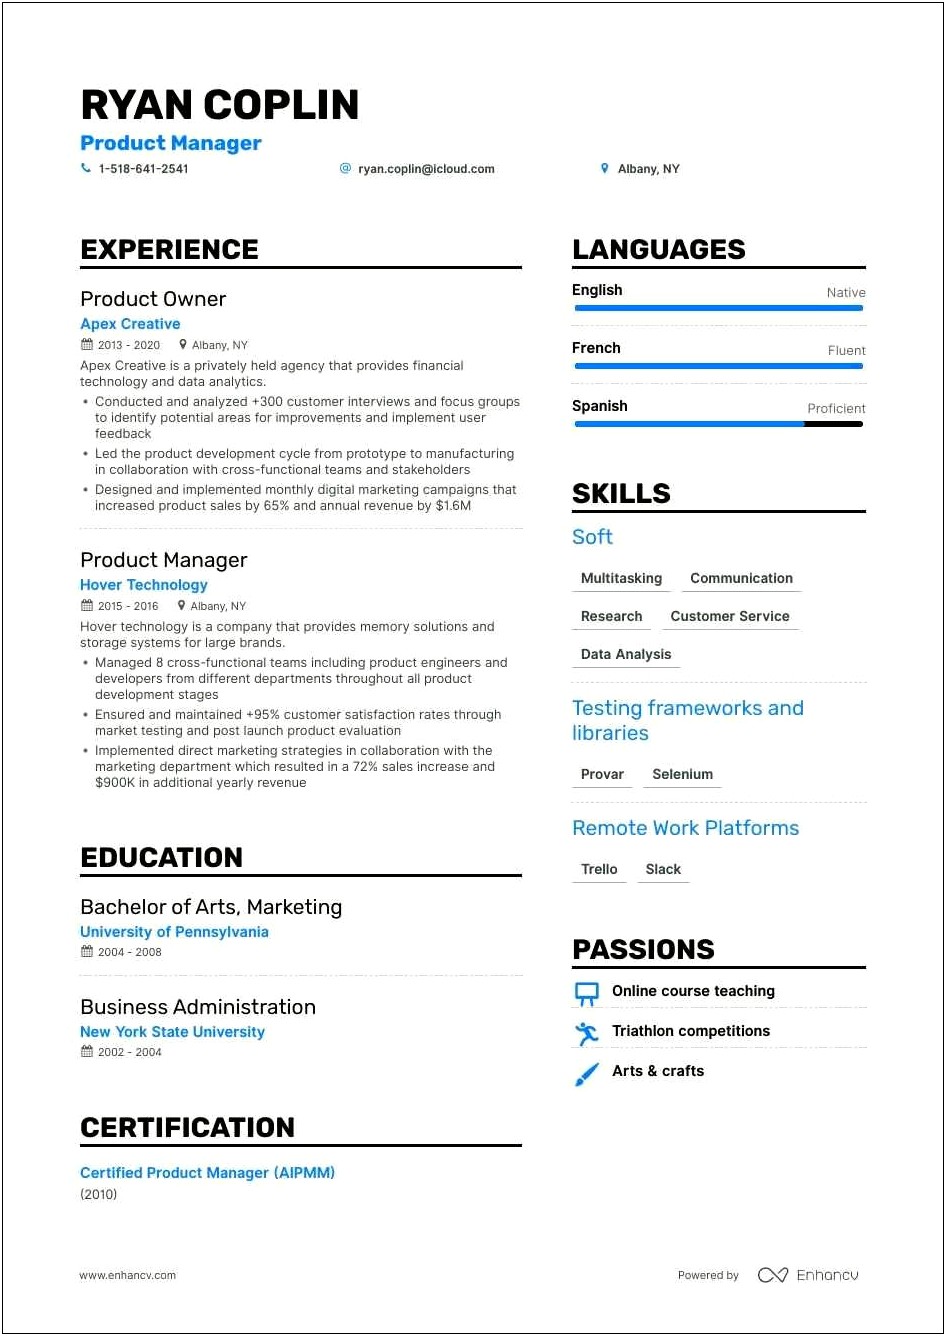 Resume Summary For Remote Jobs Examples